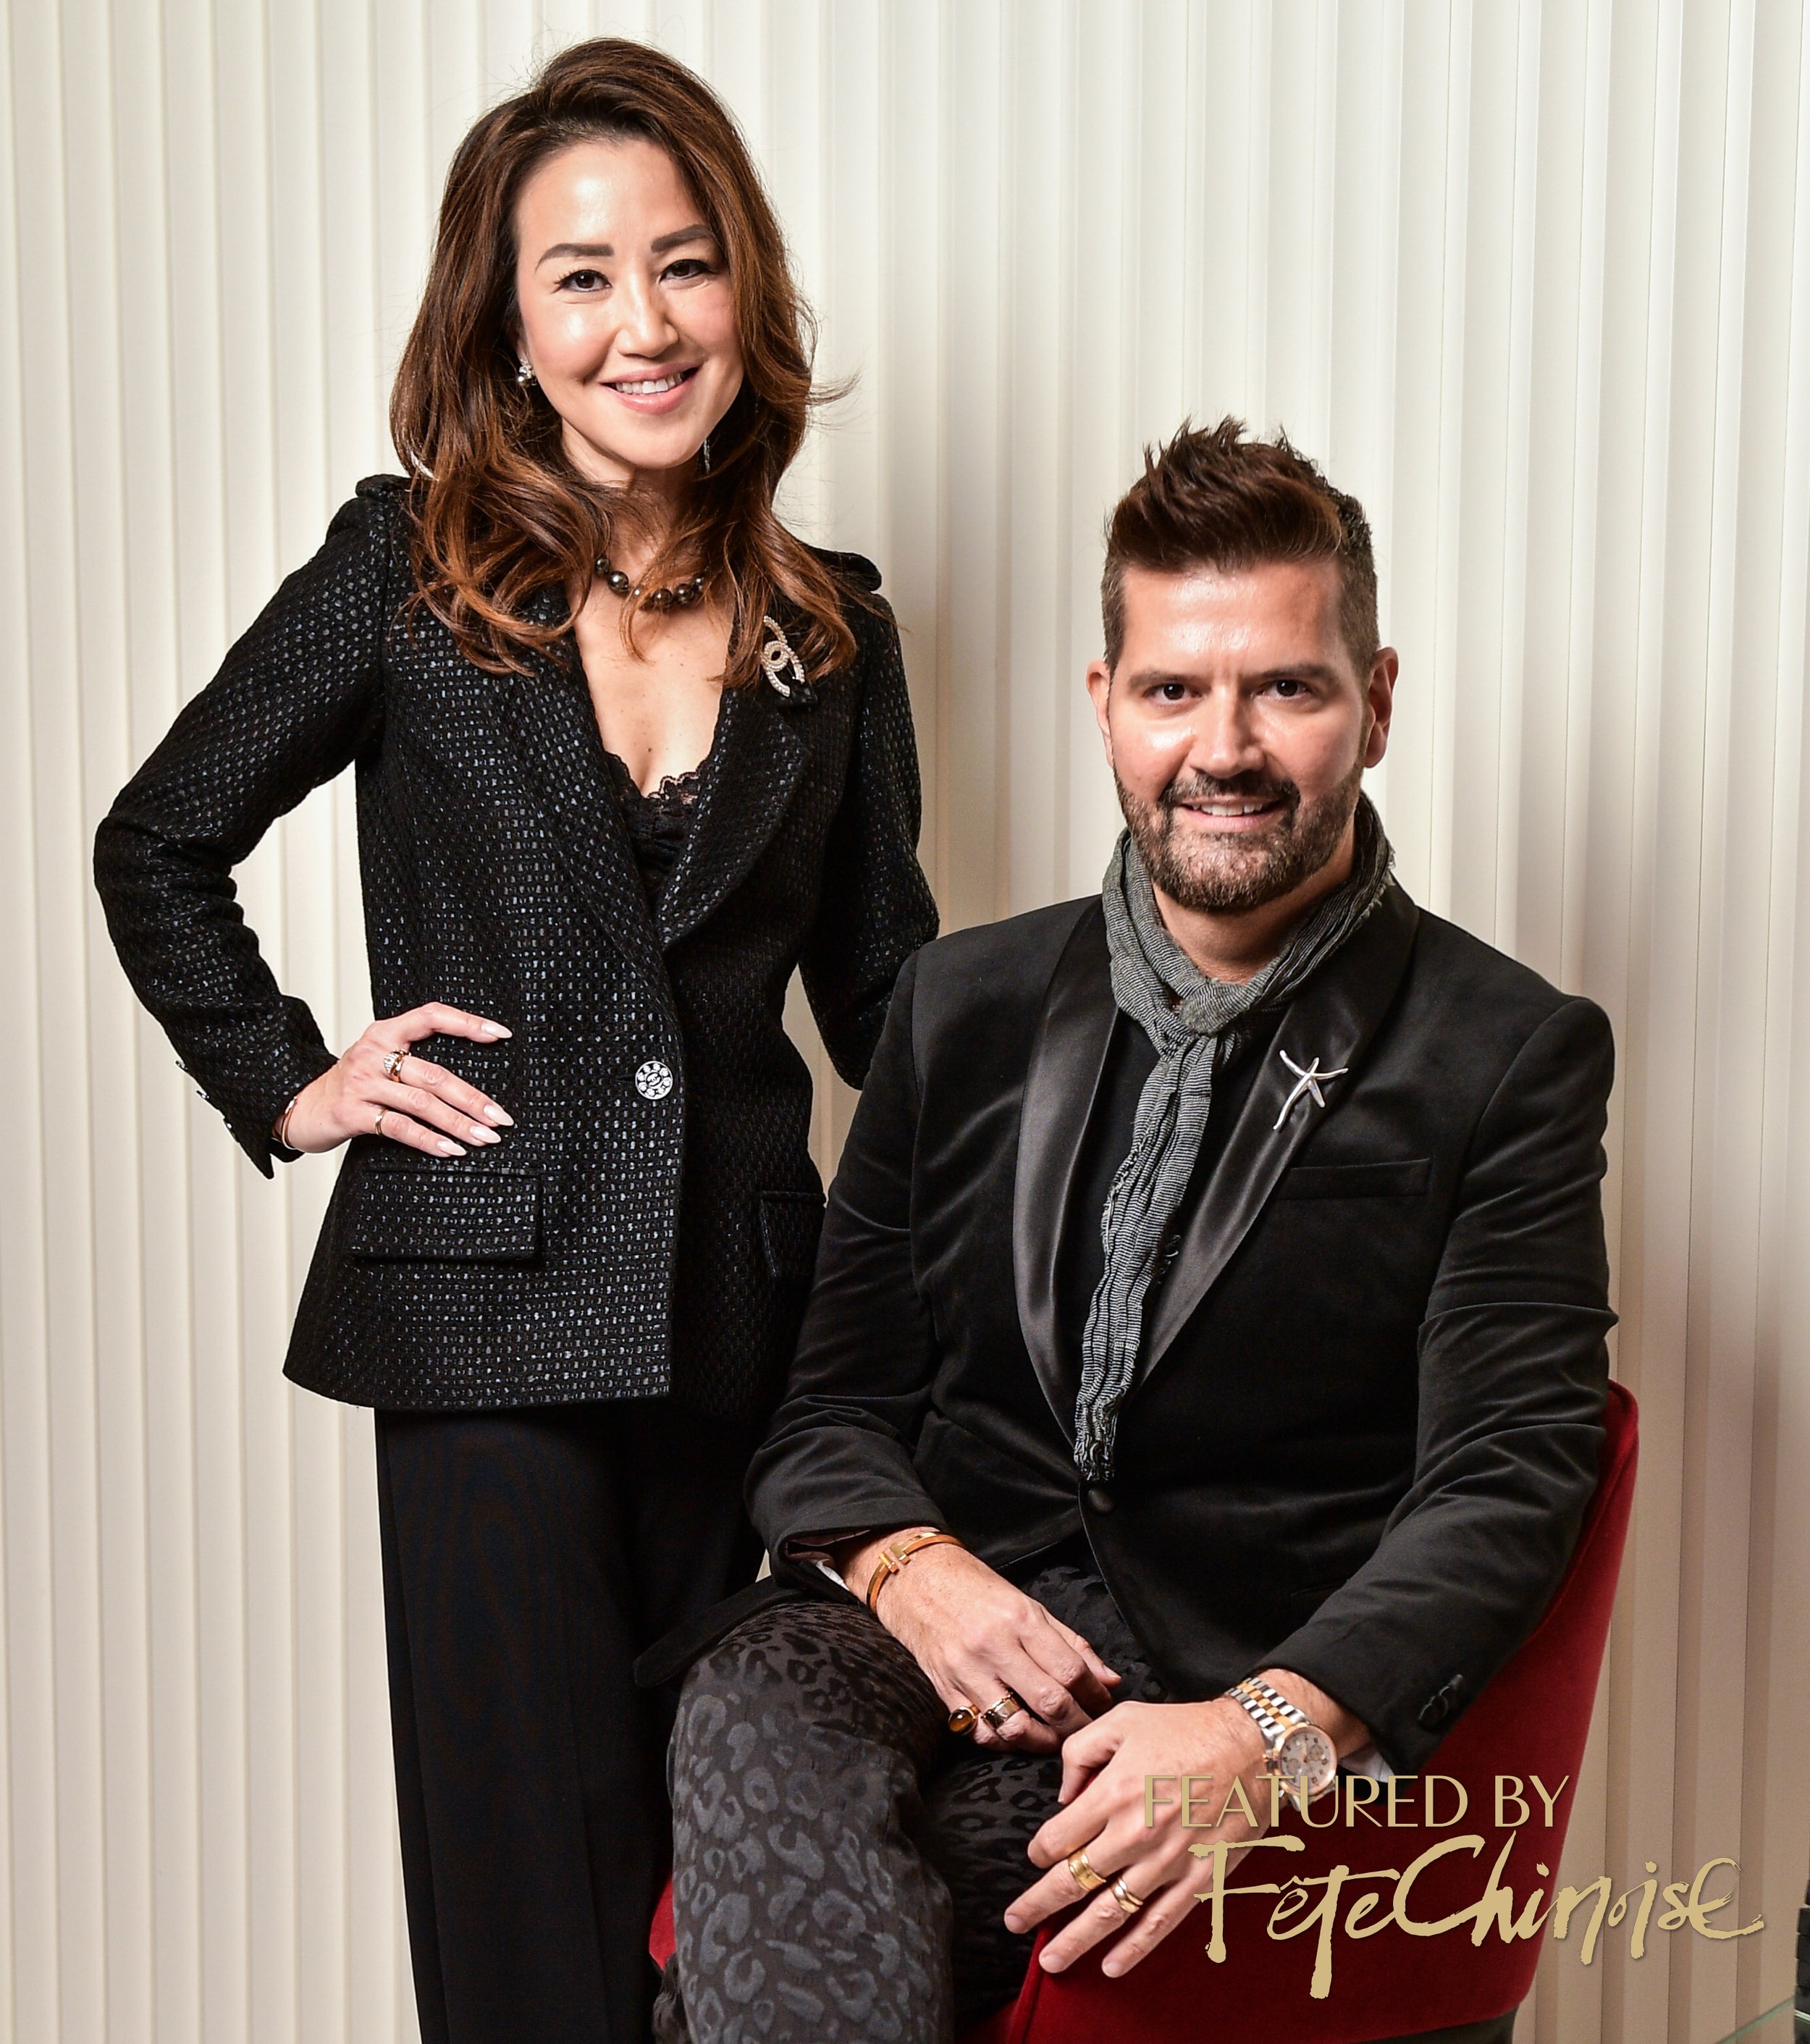 Fete-Chionise-Magaine-edition7-launch-party-holt-renfrew-photography-release-185.jpg